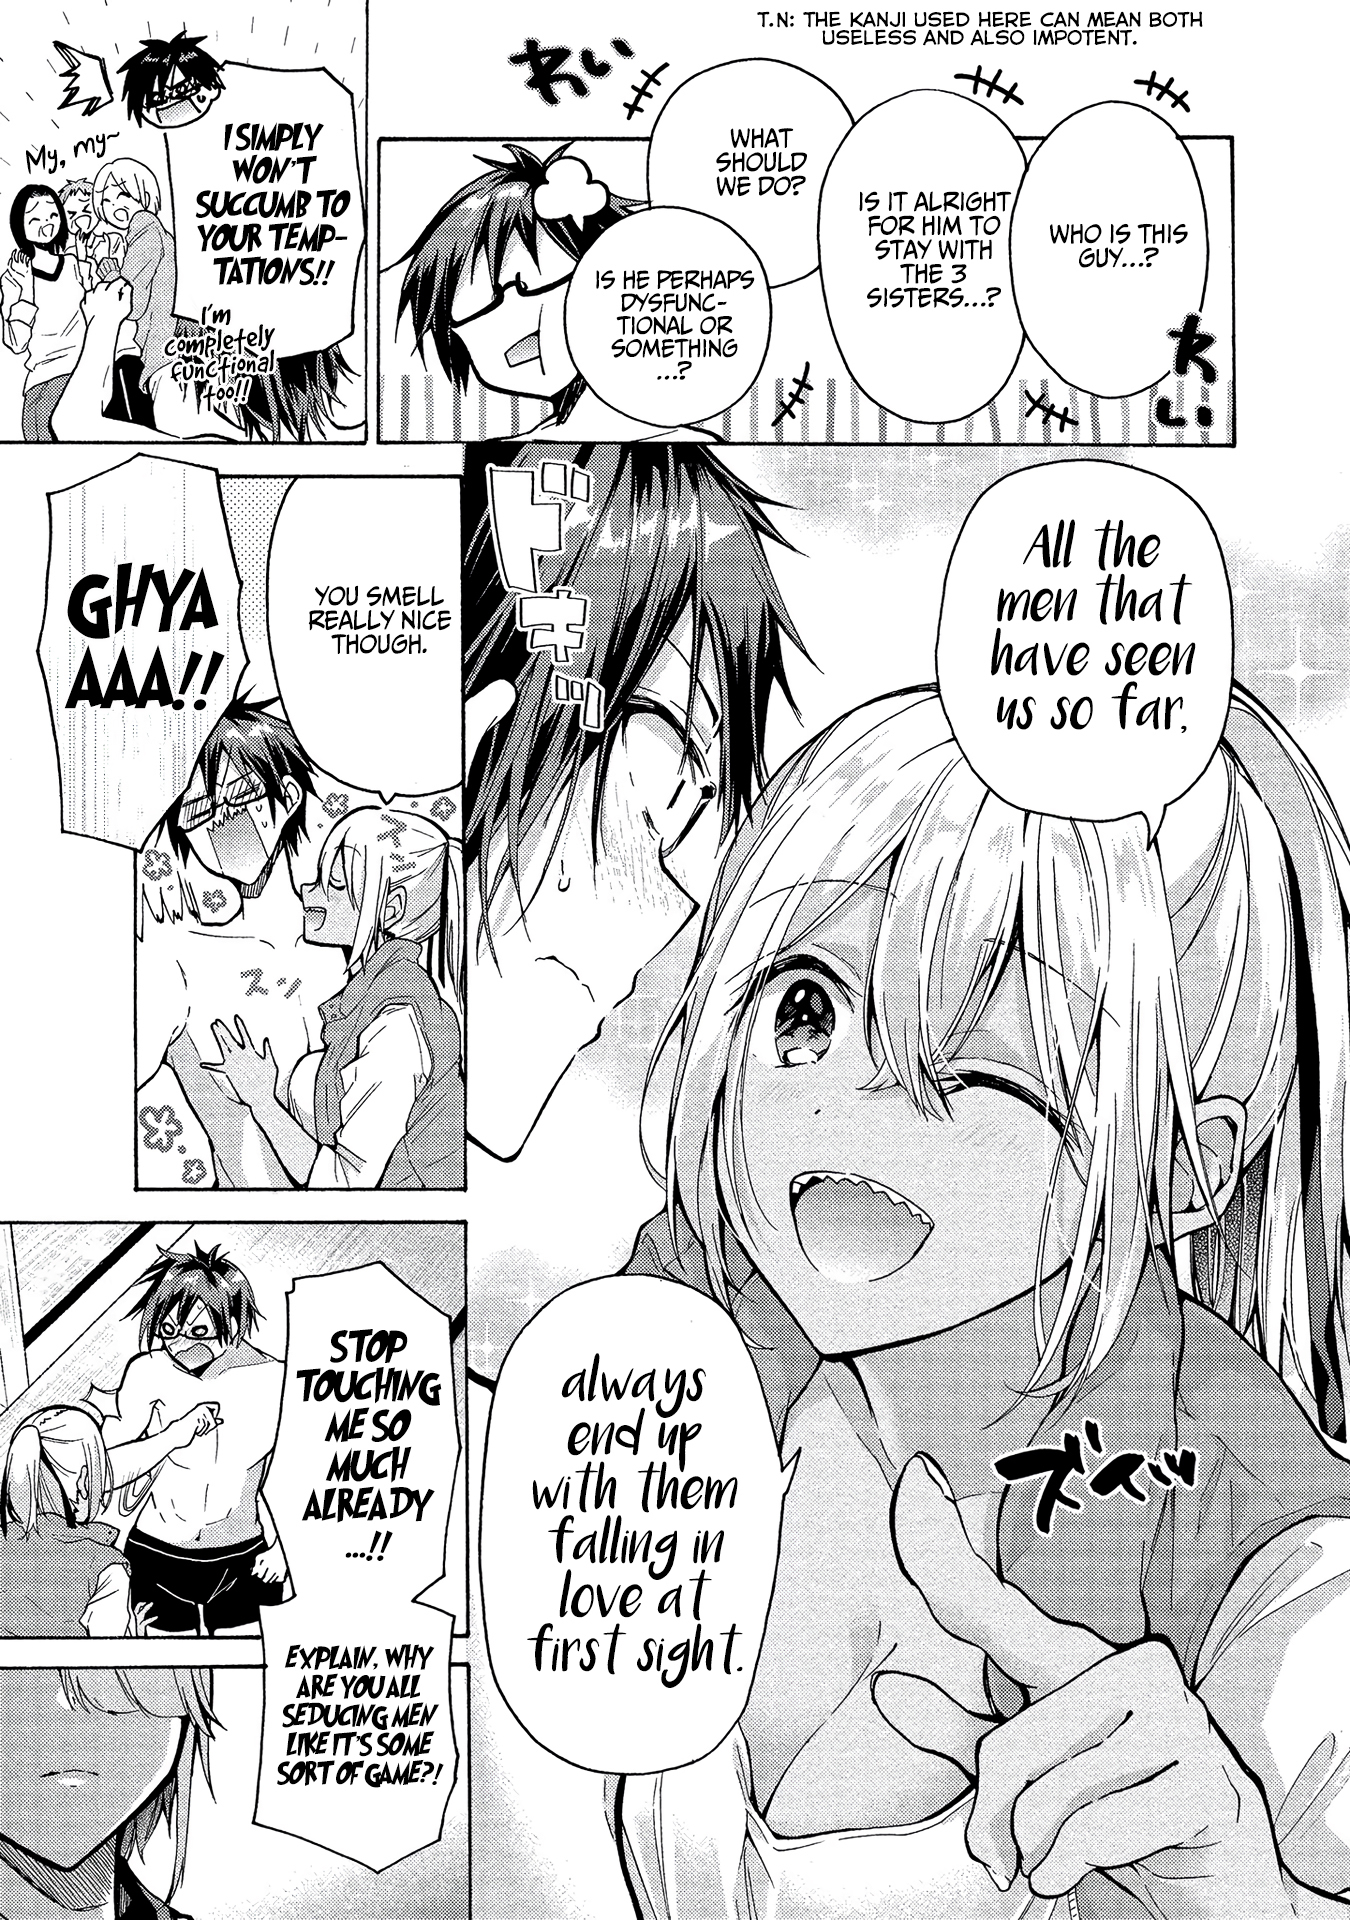 The Three Sisters Are Trying To Seduce Me!! vol.1 ch.2